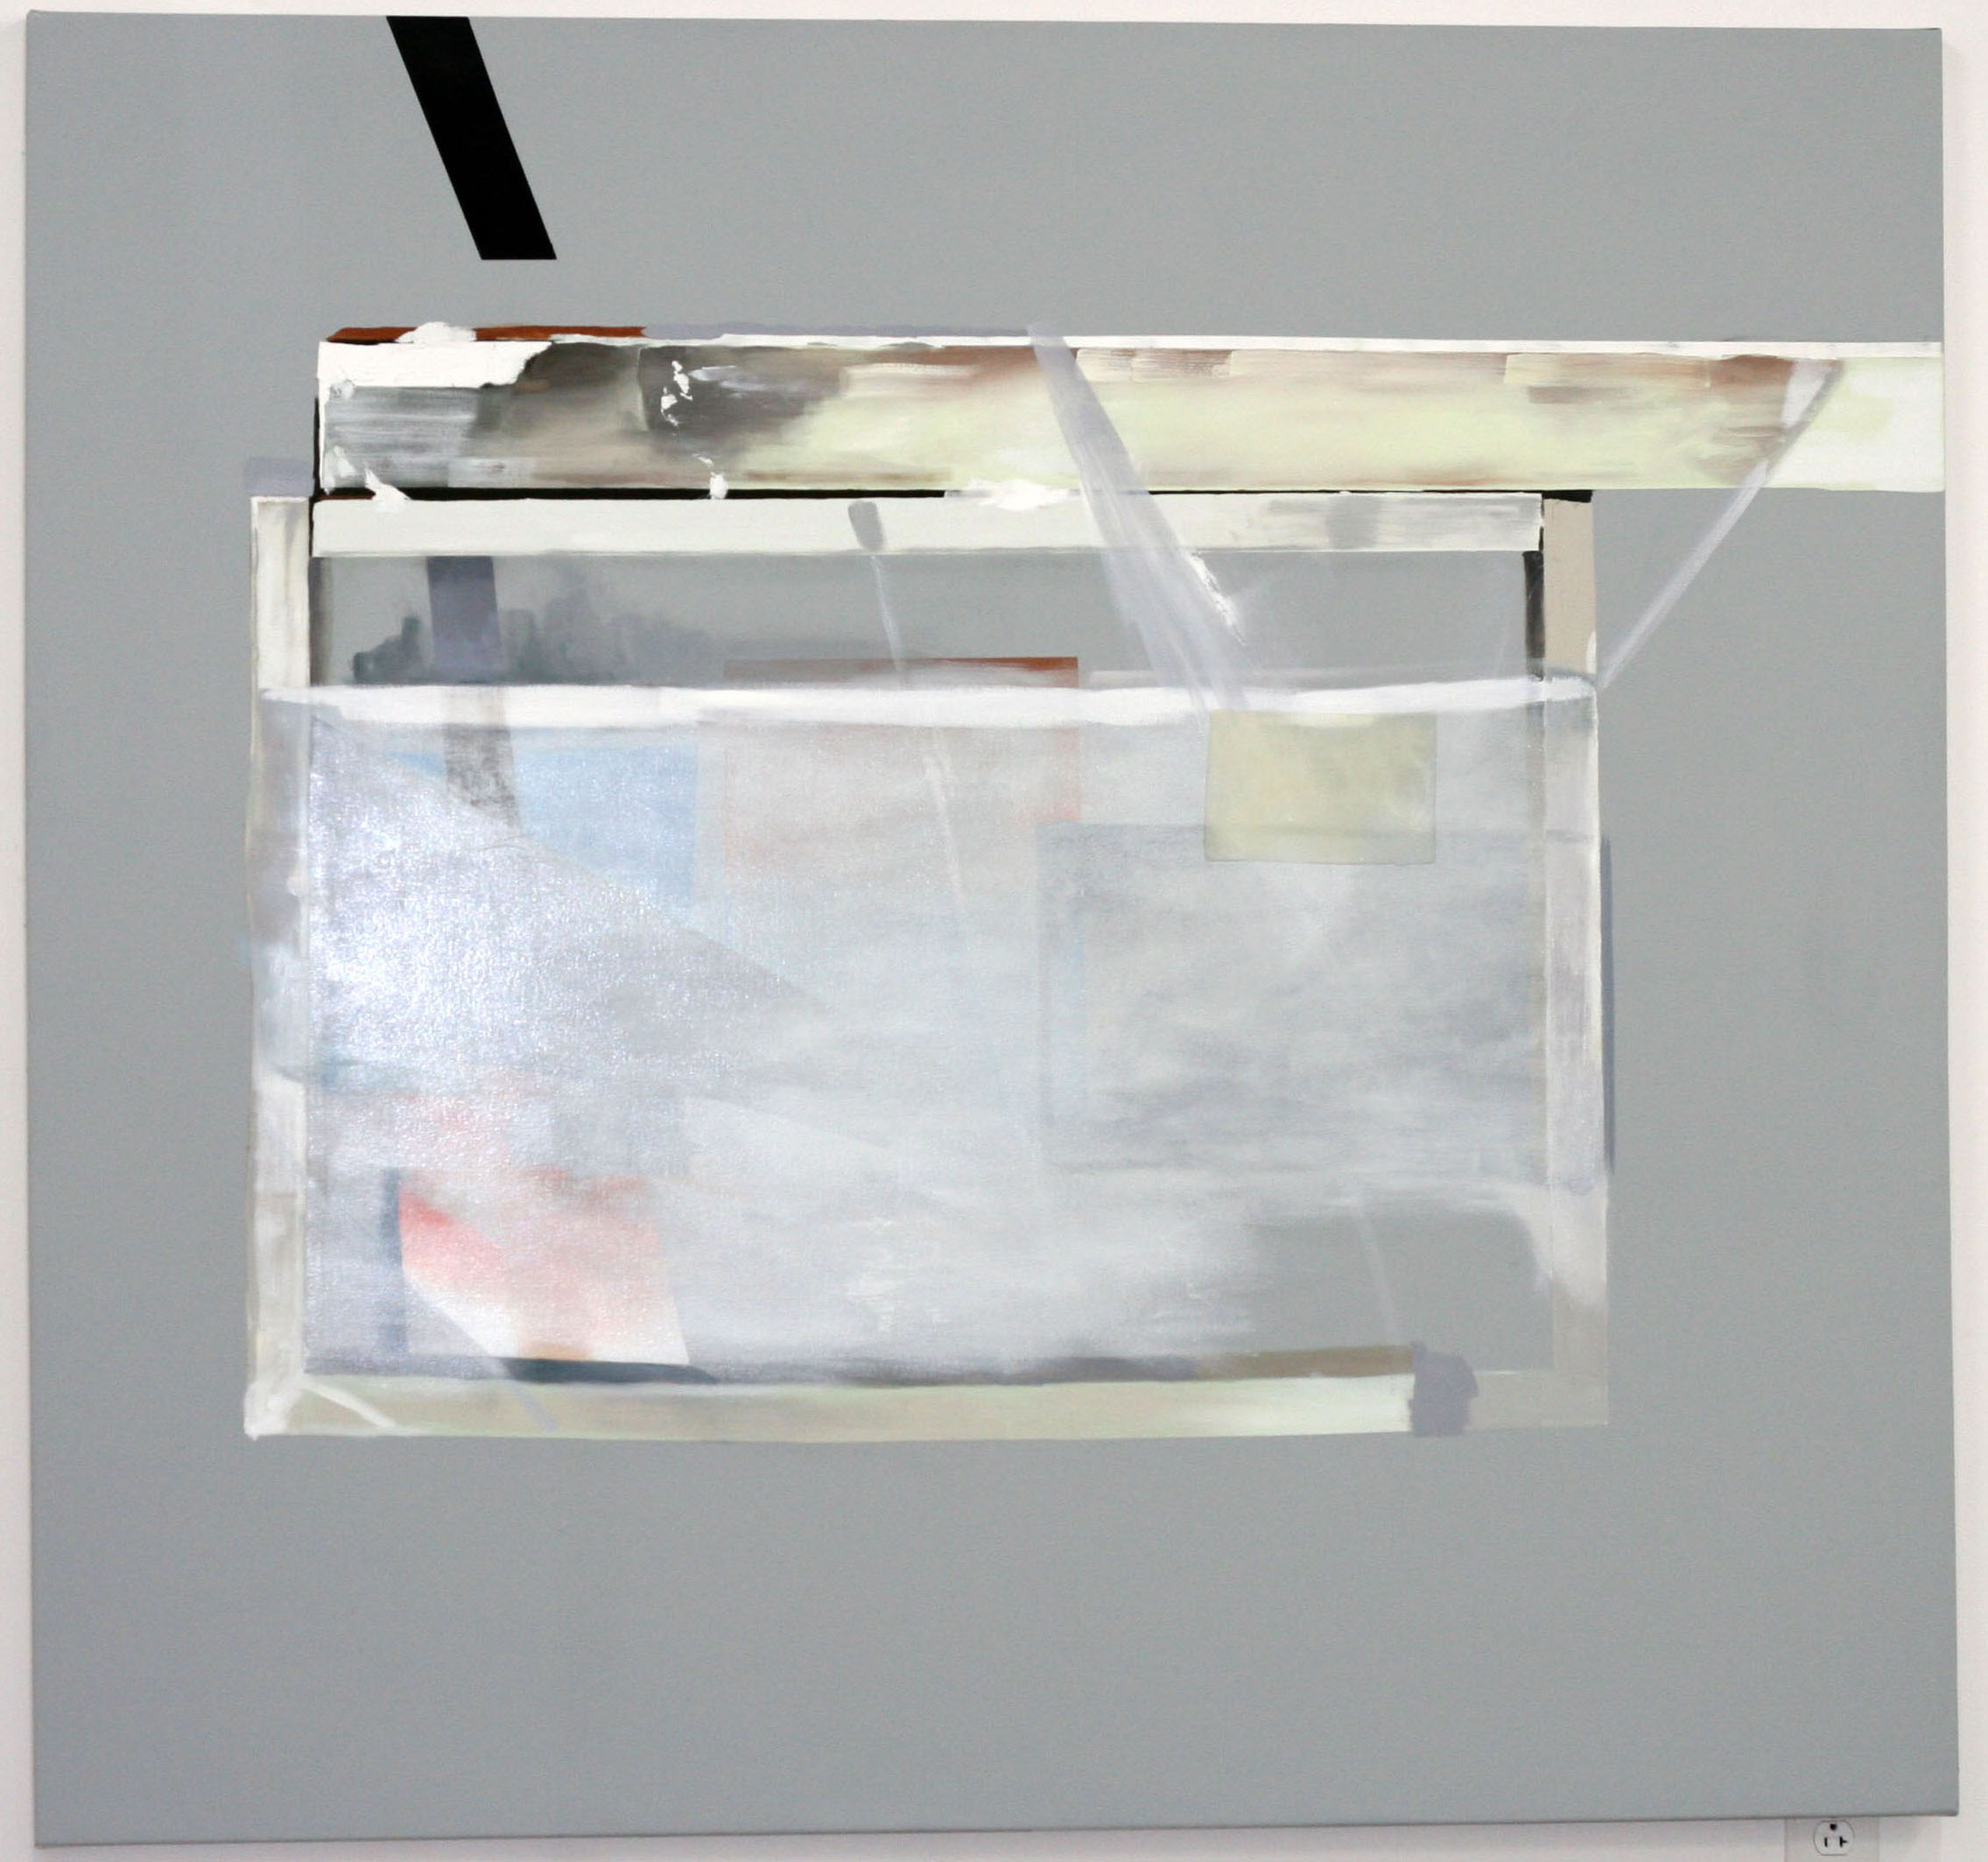   Framing a grey and white object , 2009  oil on canvas  62 x 58”    